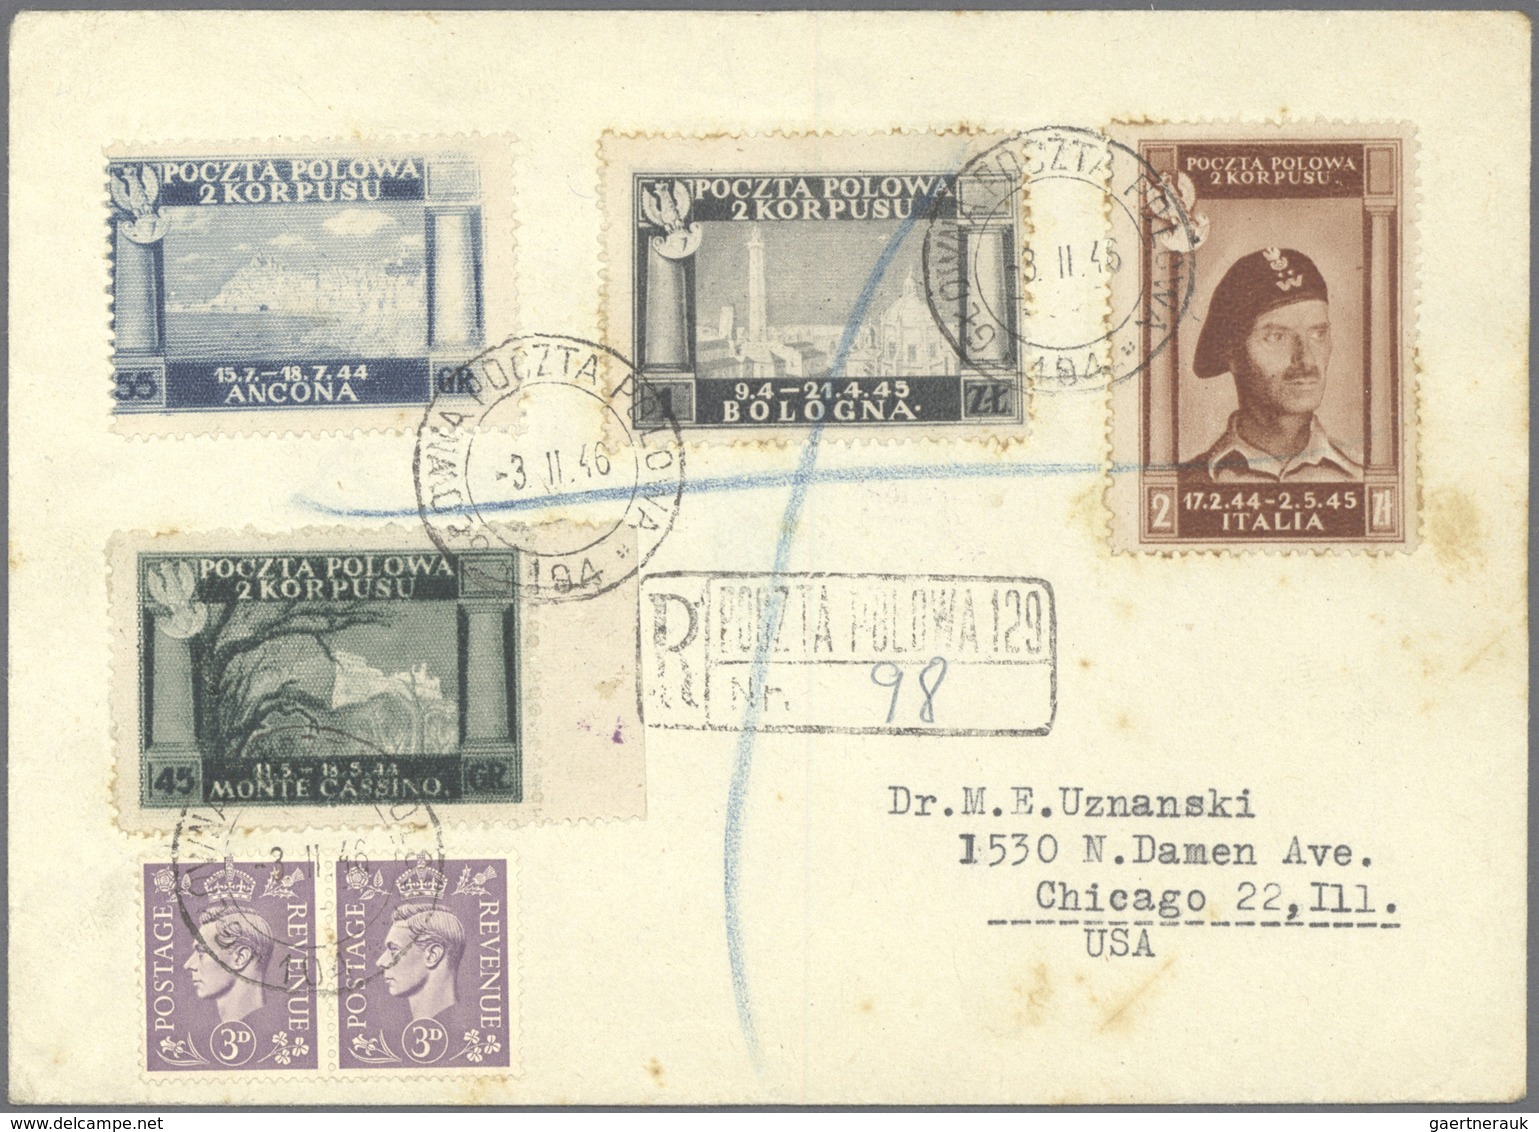 Br/**/*/(*)/Brfst Polen: 1940/1946, WWII and immediate postwar period, specialised collection in two stockbooks with p